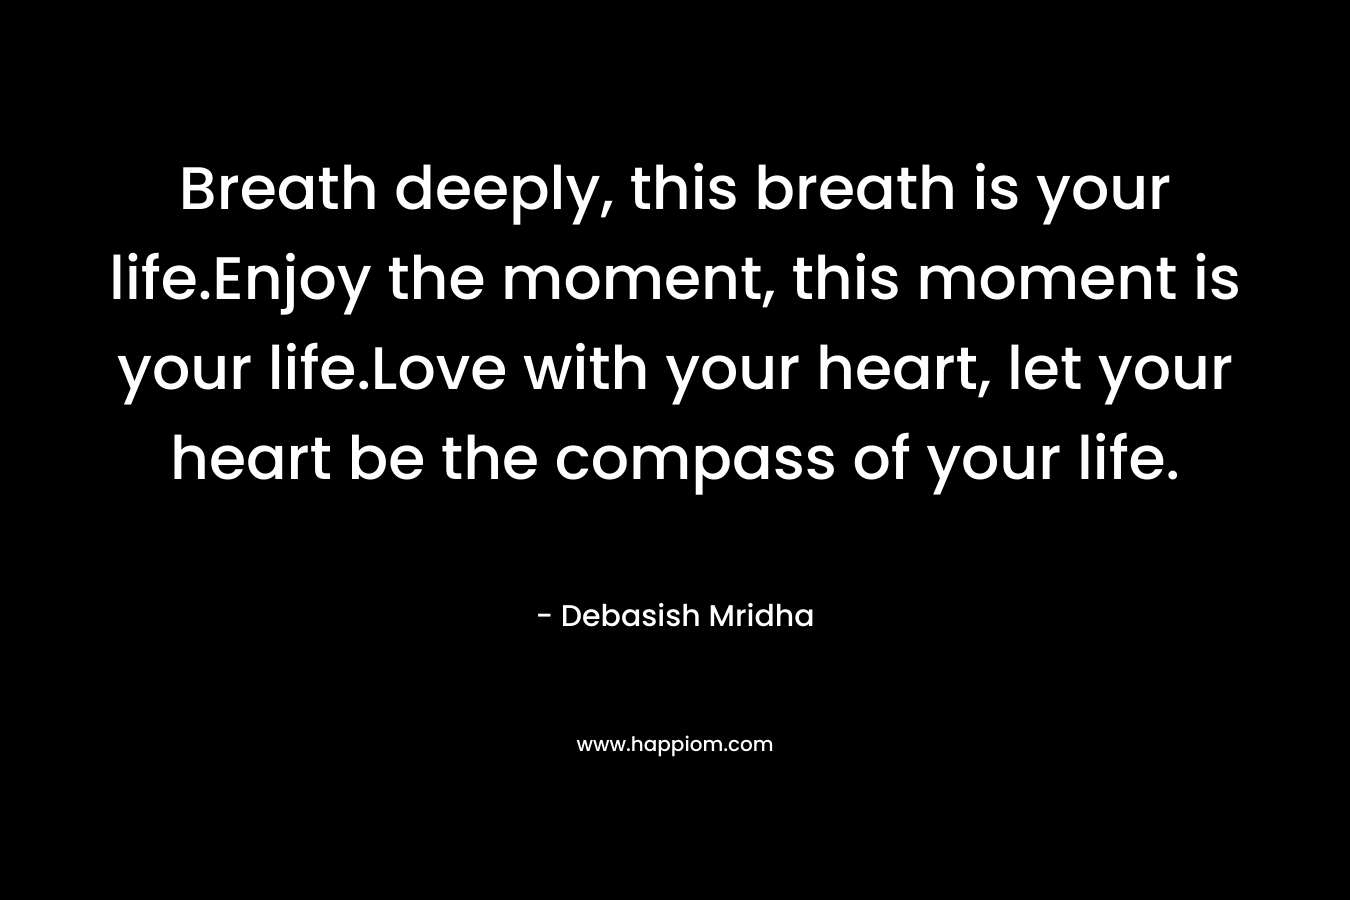 Breath deeply, this breath is your life.Enjoy the moment, this moment is your life.Love with your heart, let your heart be the compass of your life. – Debasish Mridha